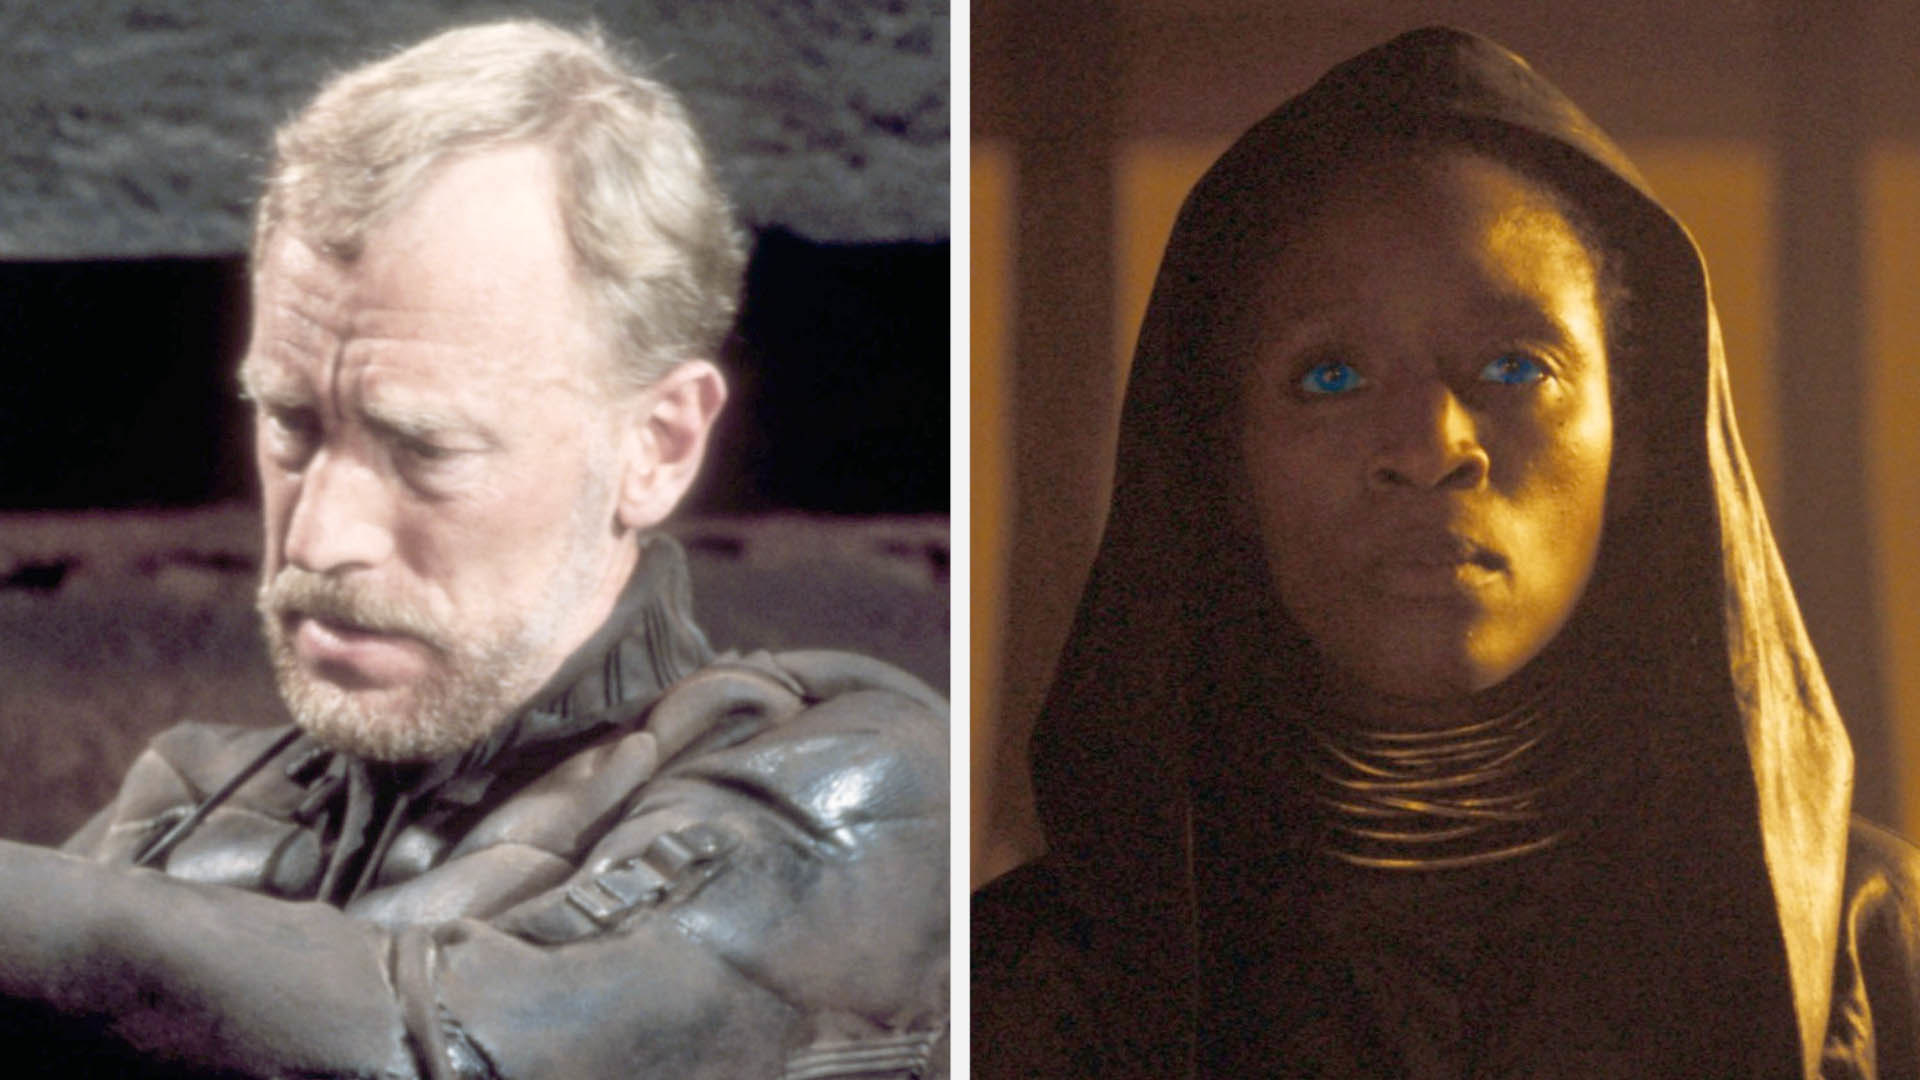 Max von Sydow (an older, white man) as Dr. Liet Kynes vs. Sharon Duncan-Brewster (a younger, black woman) with glowing blue eyes as Dr. Liet Kynes